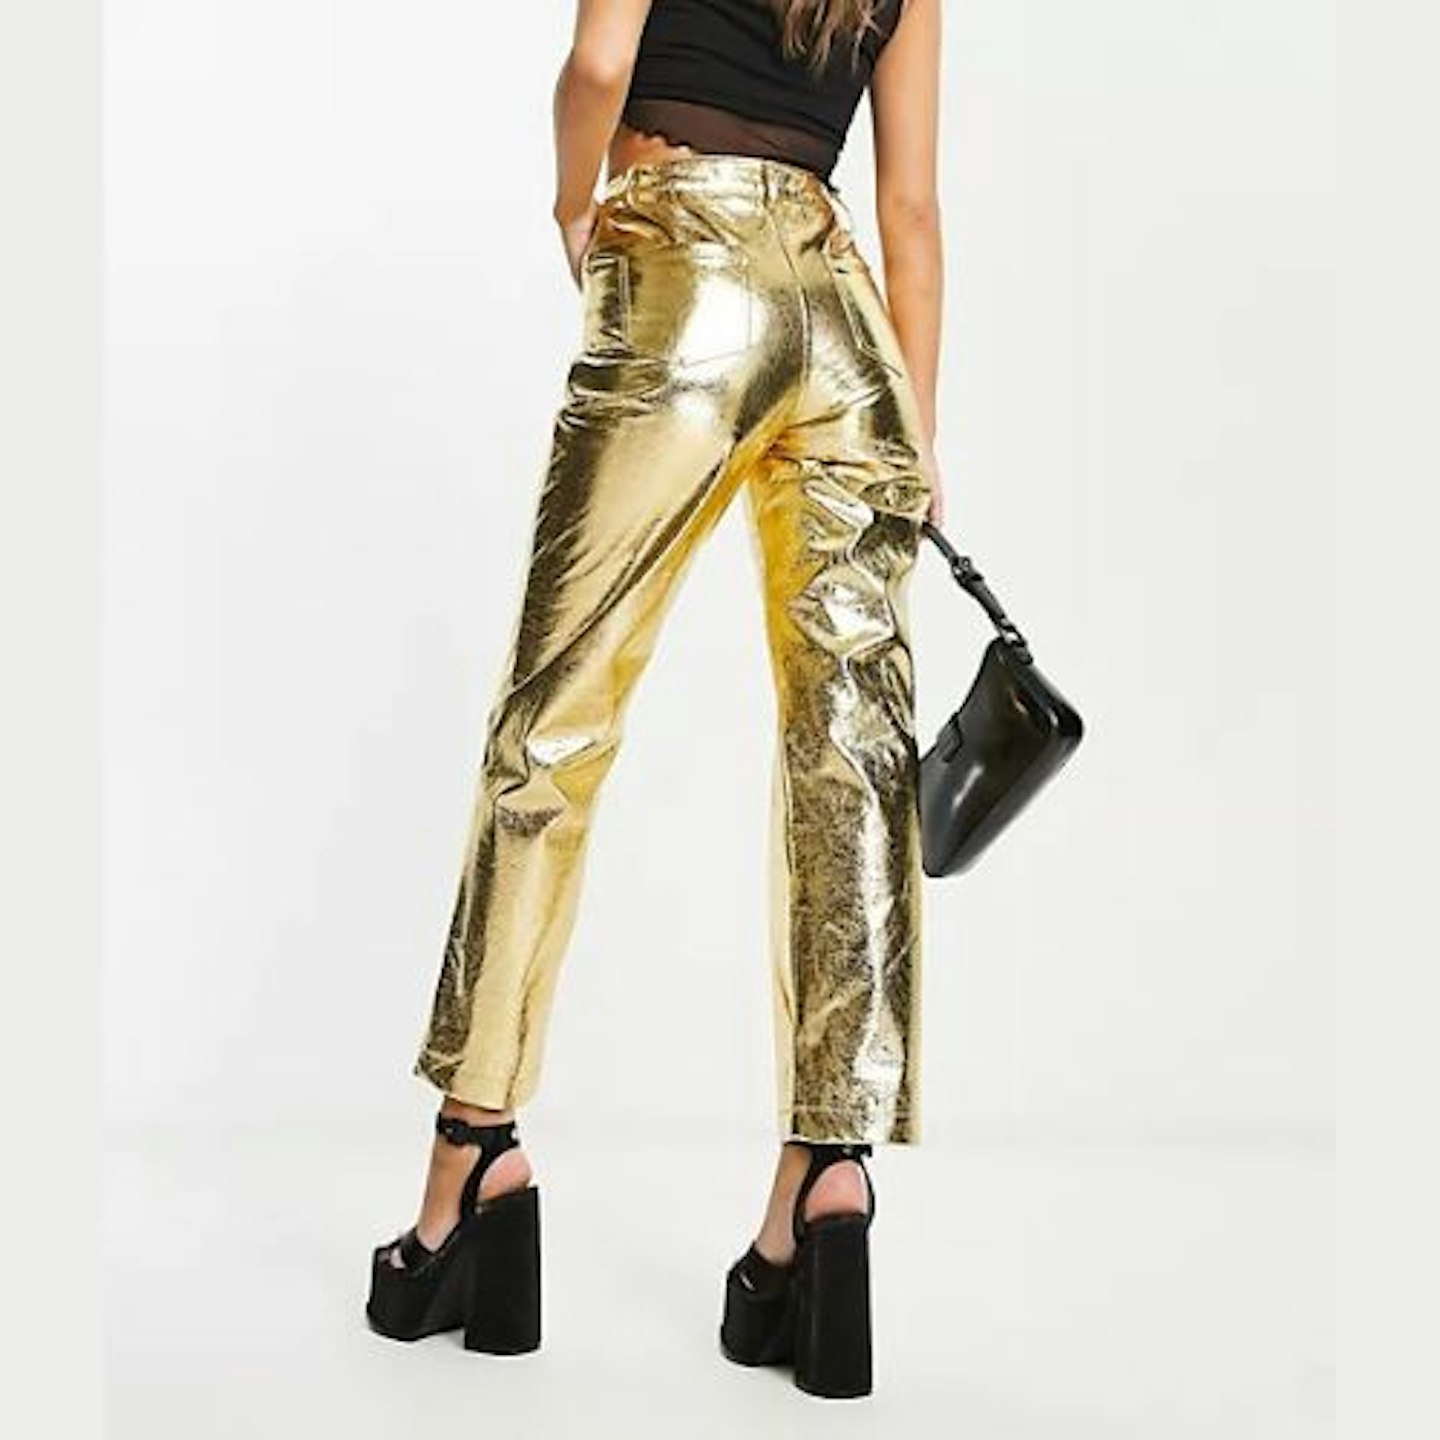 Amy Lynn Lupe Trouser in Textured Metallic Gold